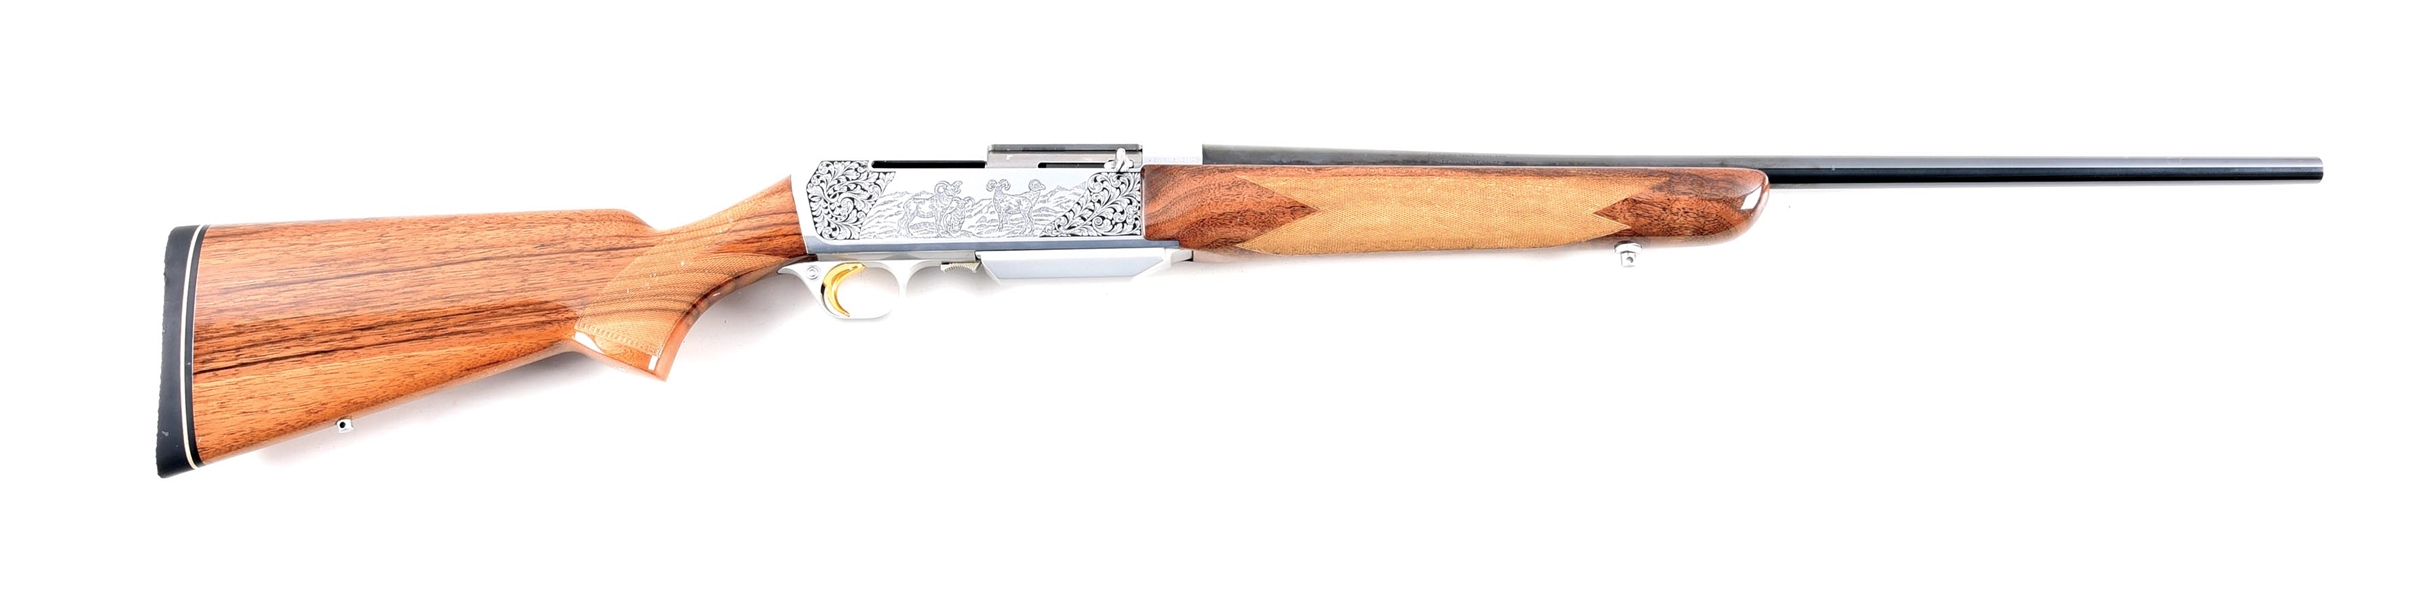 (M) ENGRAVED BELGIAN BROWNING BAR SEMI-AUTOMATIC RIFLE WITH FACTORY BOX.